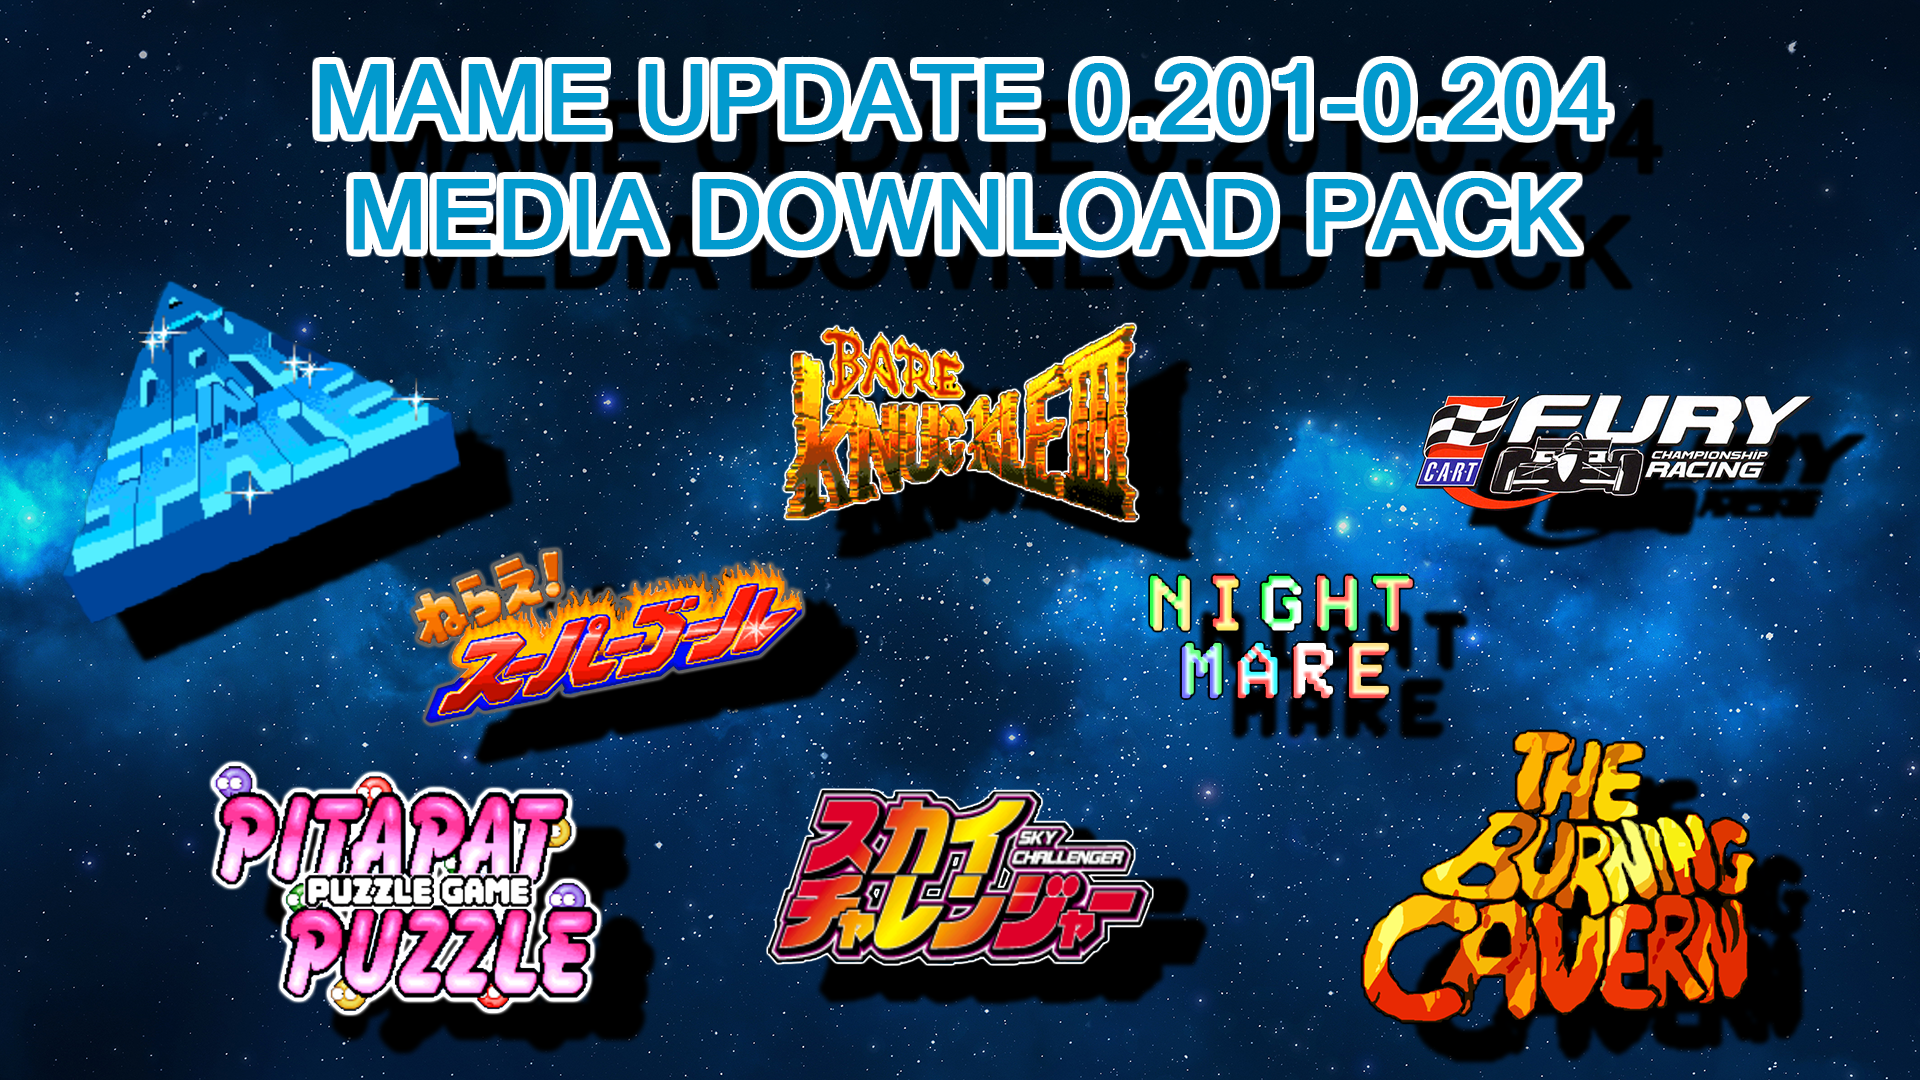 Mame Update 0 1 0 4 New Games Download Pack Game Media Packs Launchbox Community Forums